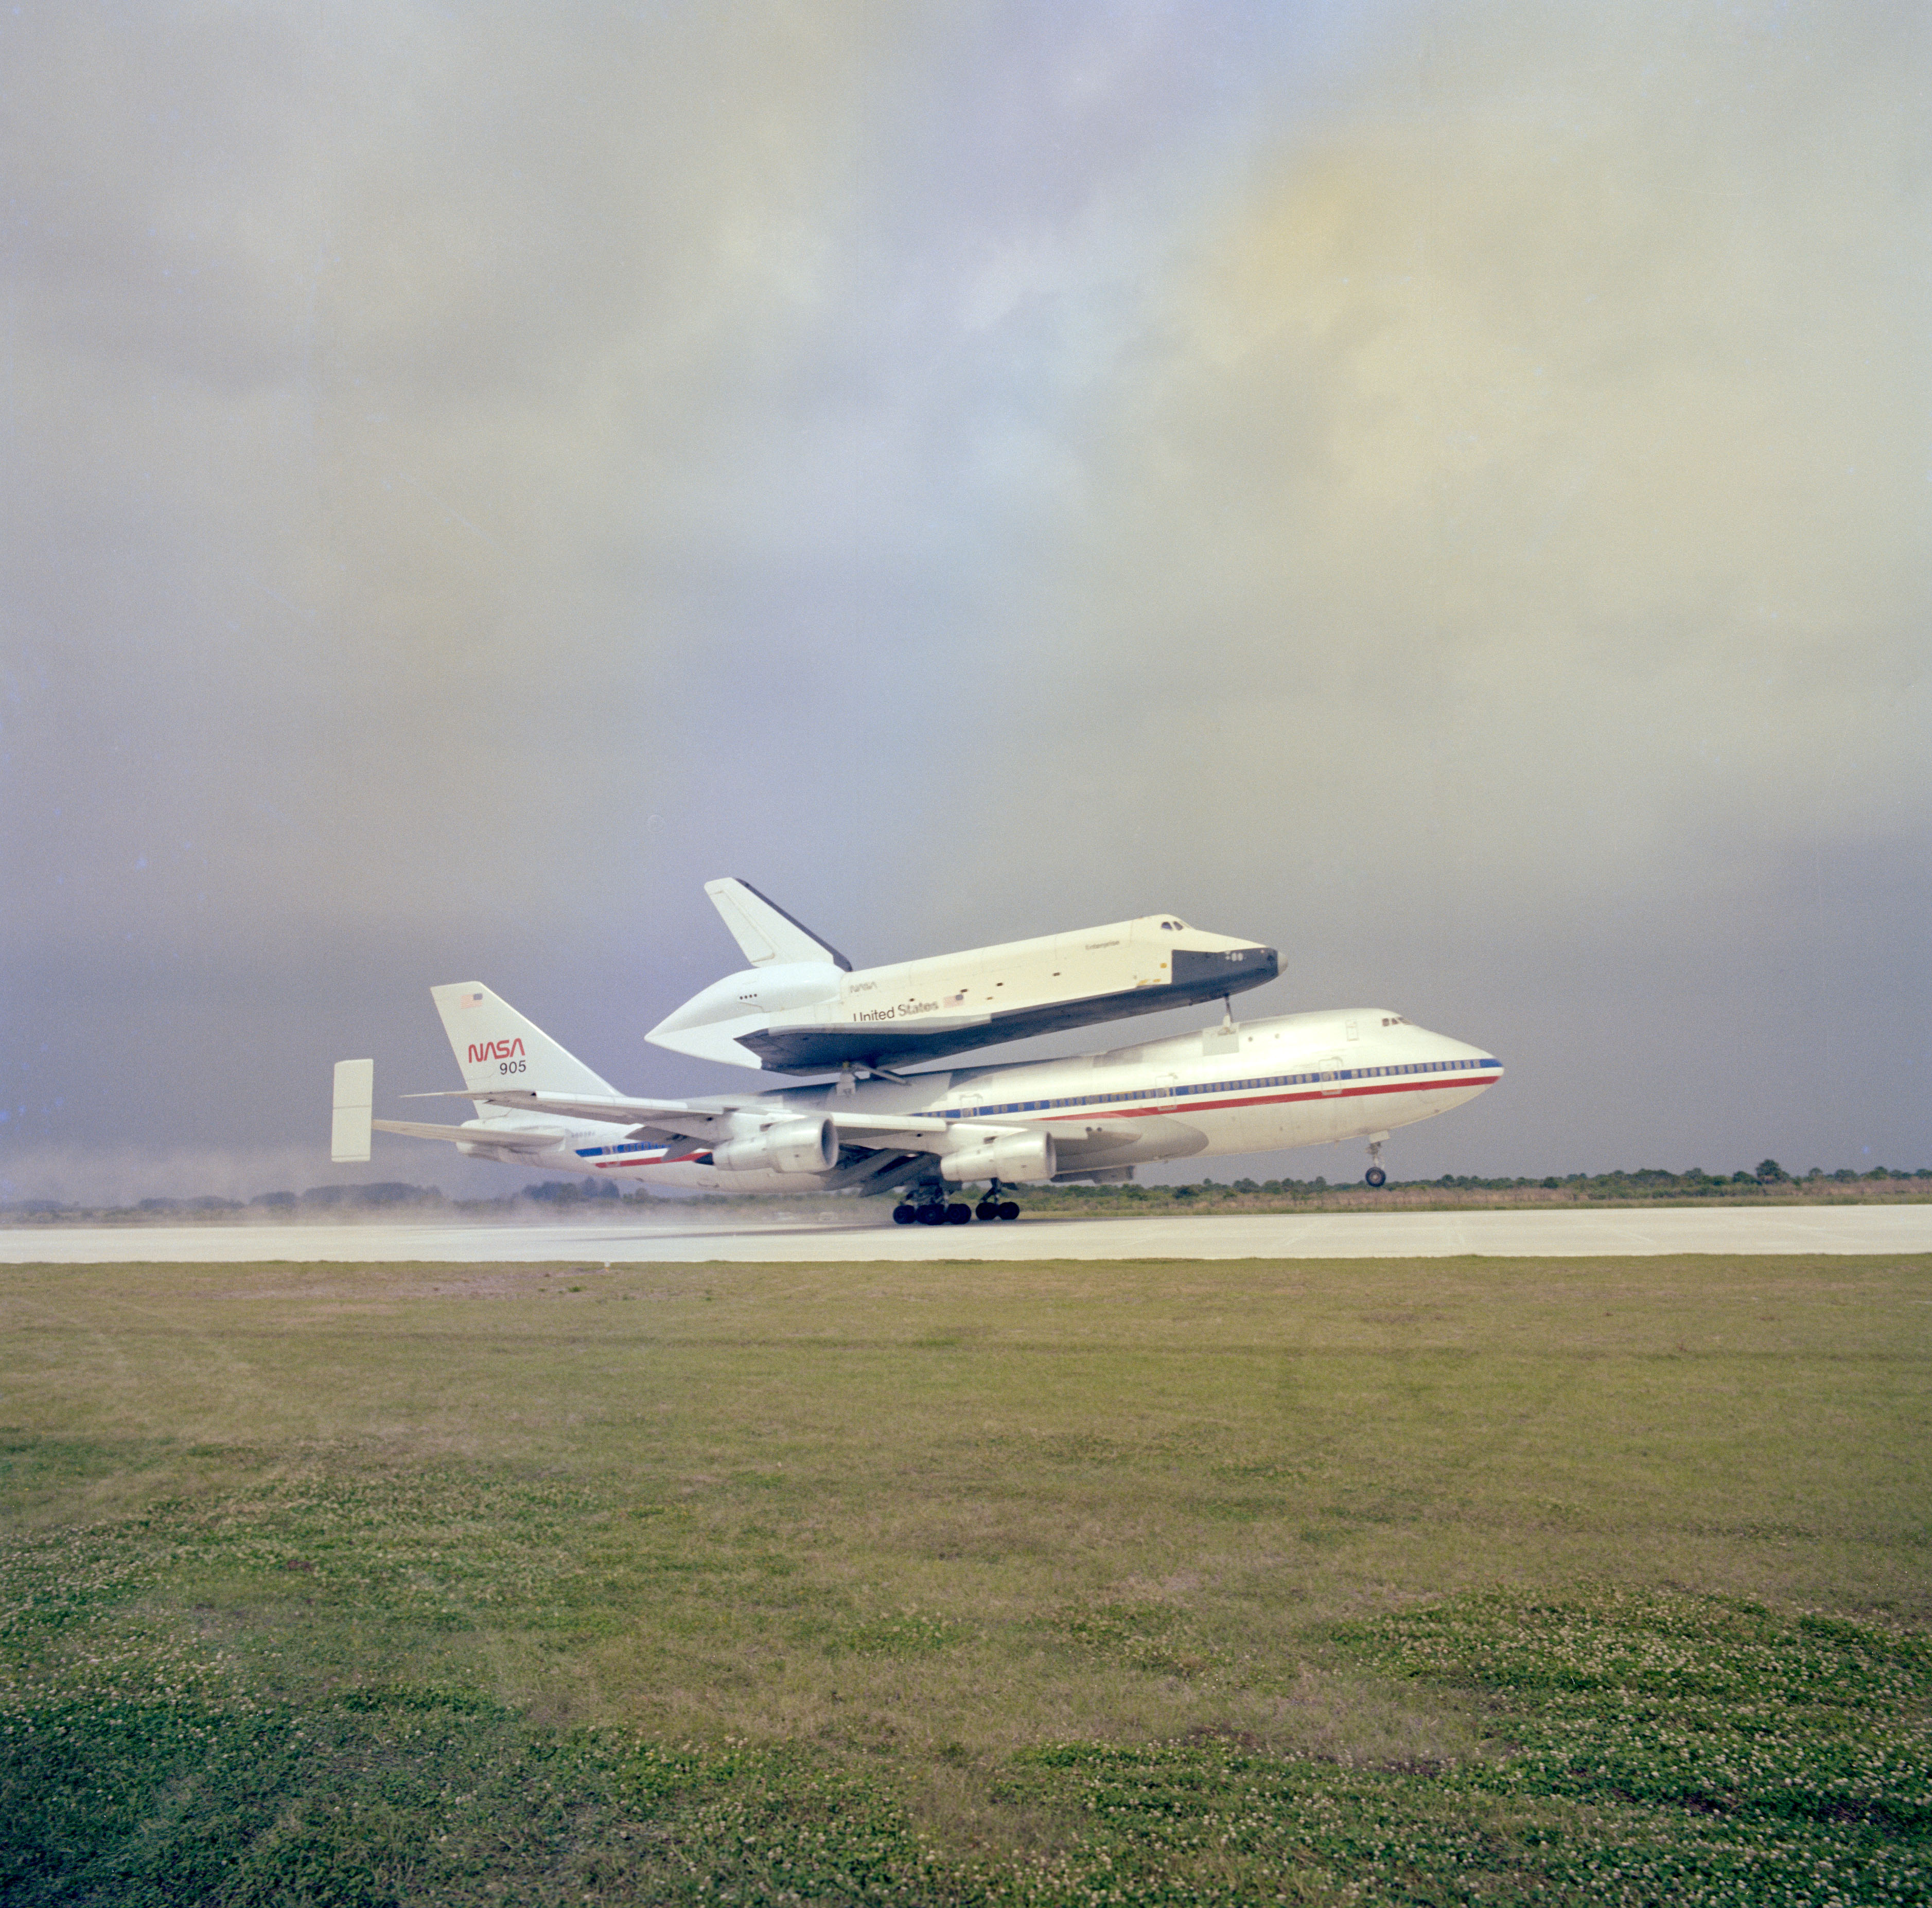 Enterprise atop its Shuttle Carrier Aircraft (SCA) touches down on the runway at NASA's Kennedy Space Center in Florida